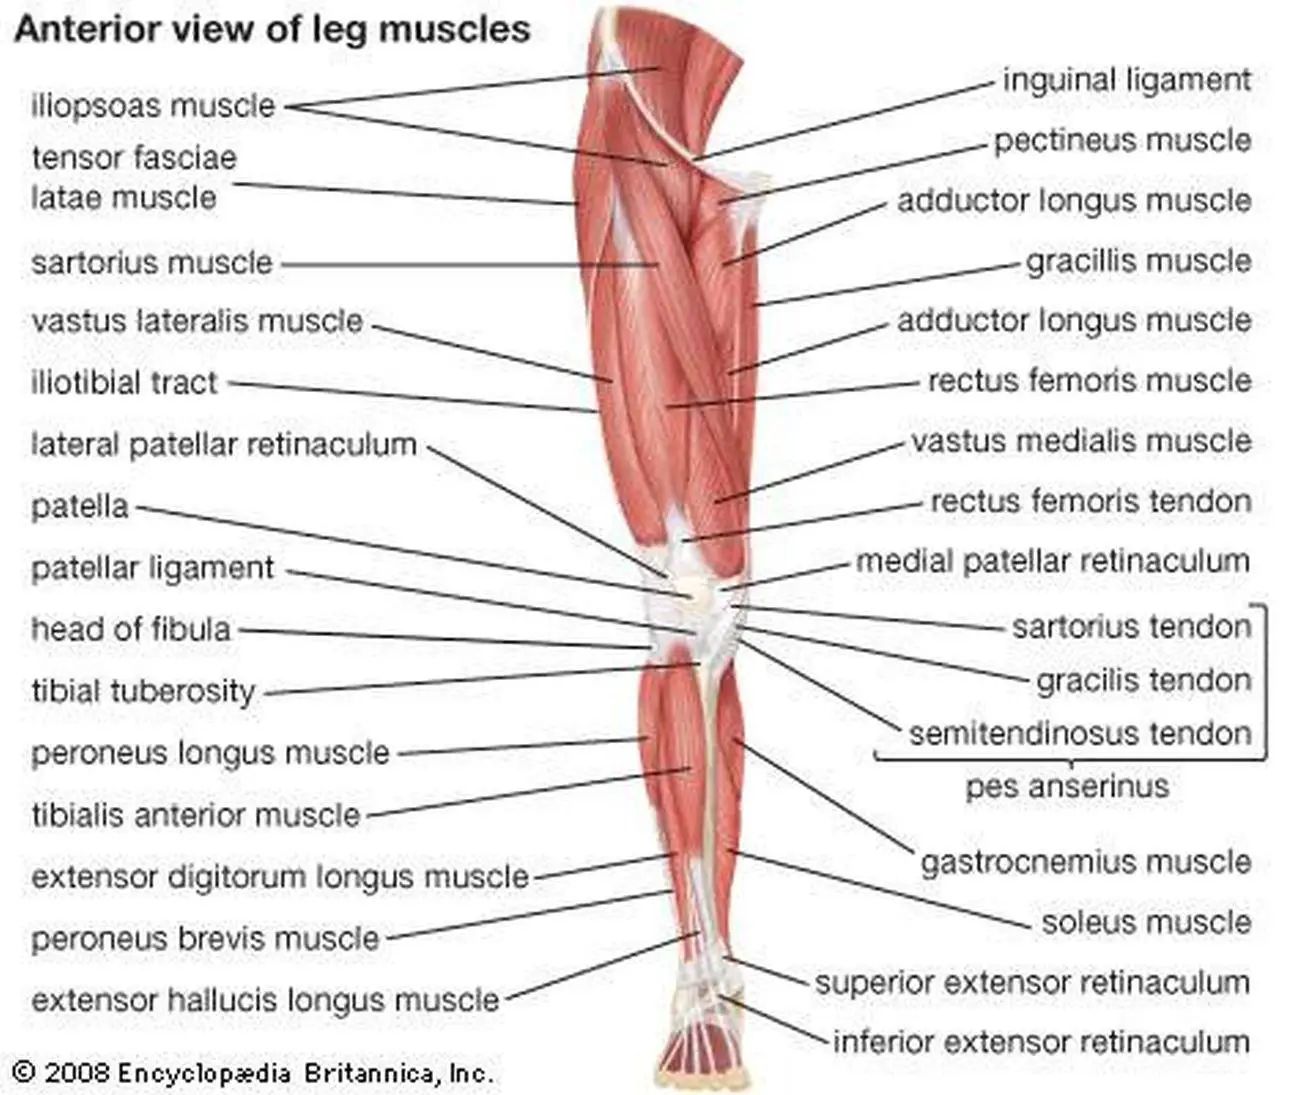 Pictures Of Anterior Leg Muscles